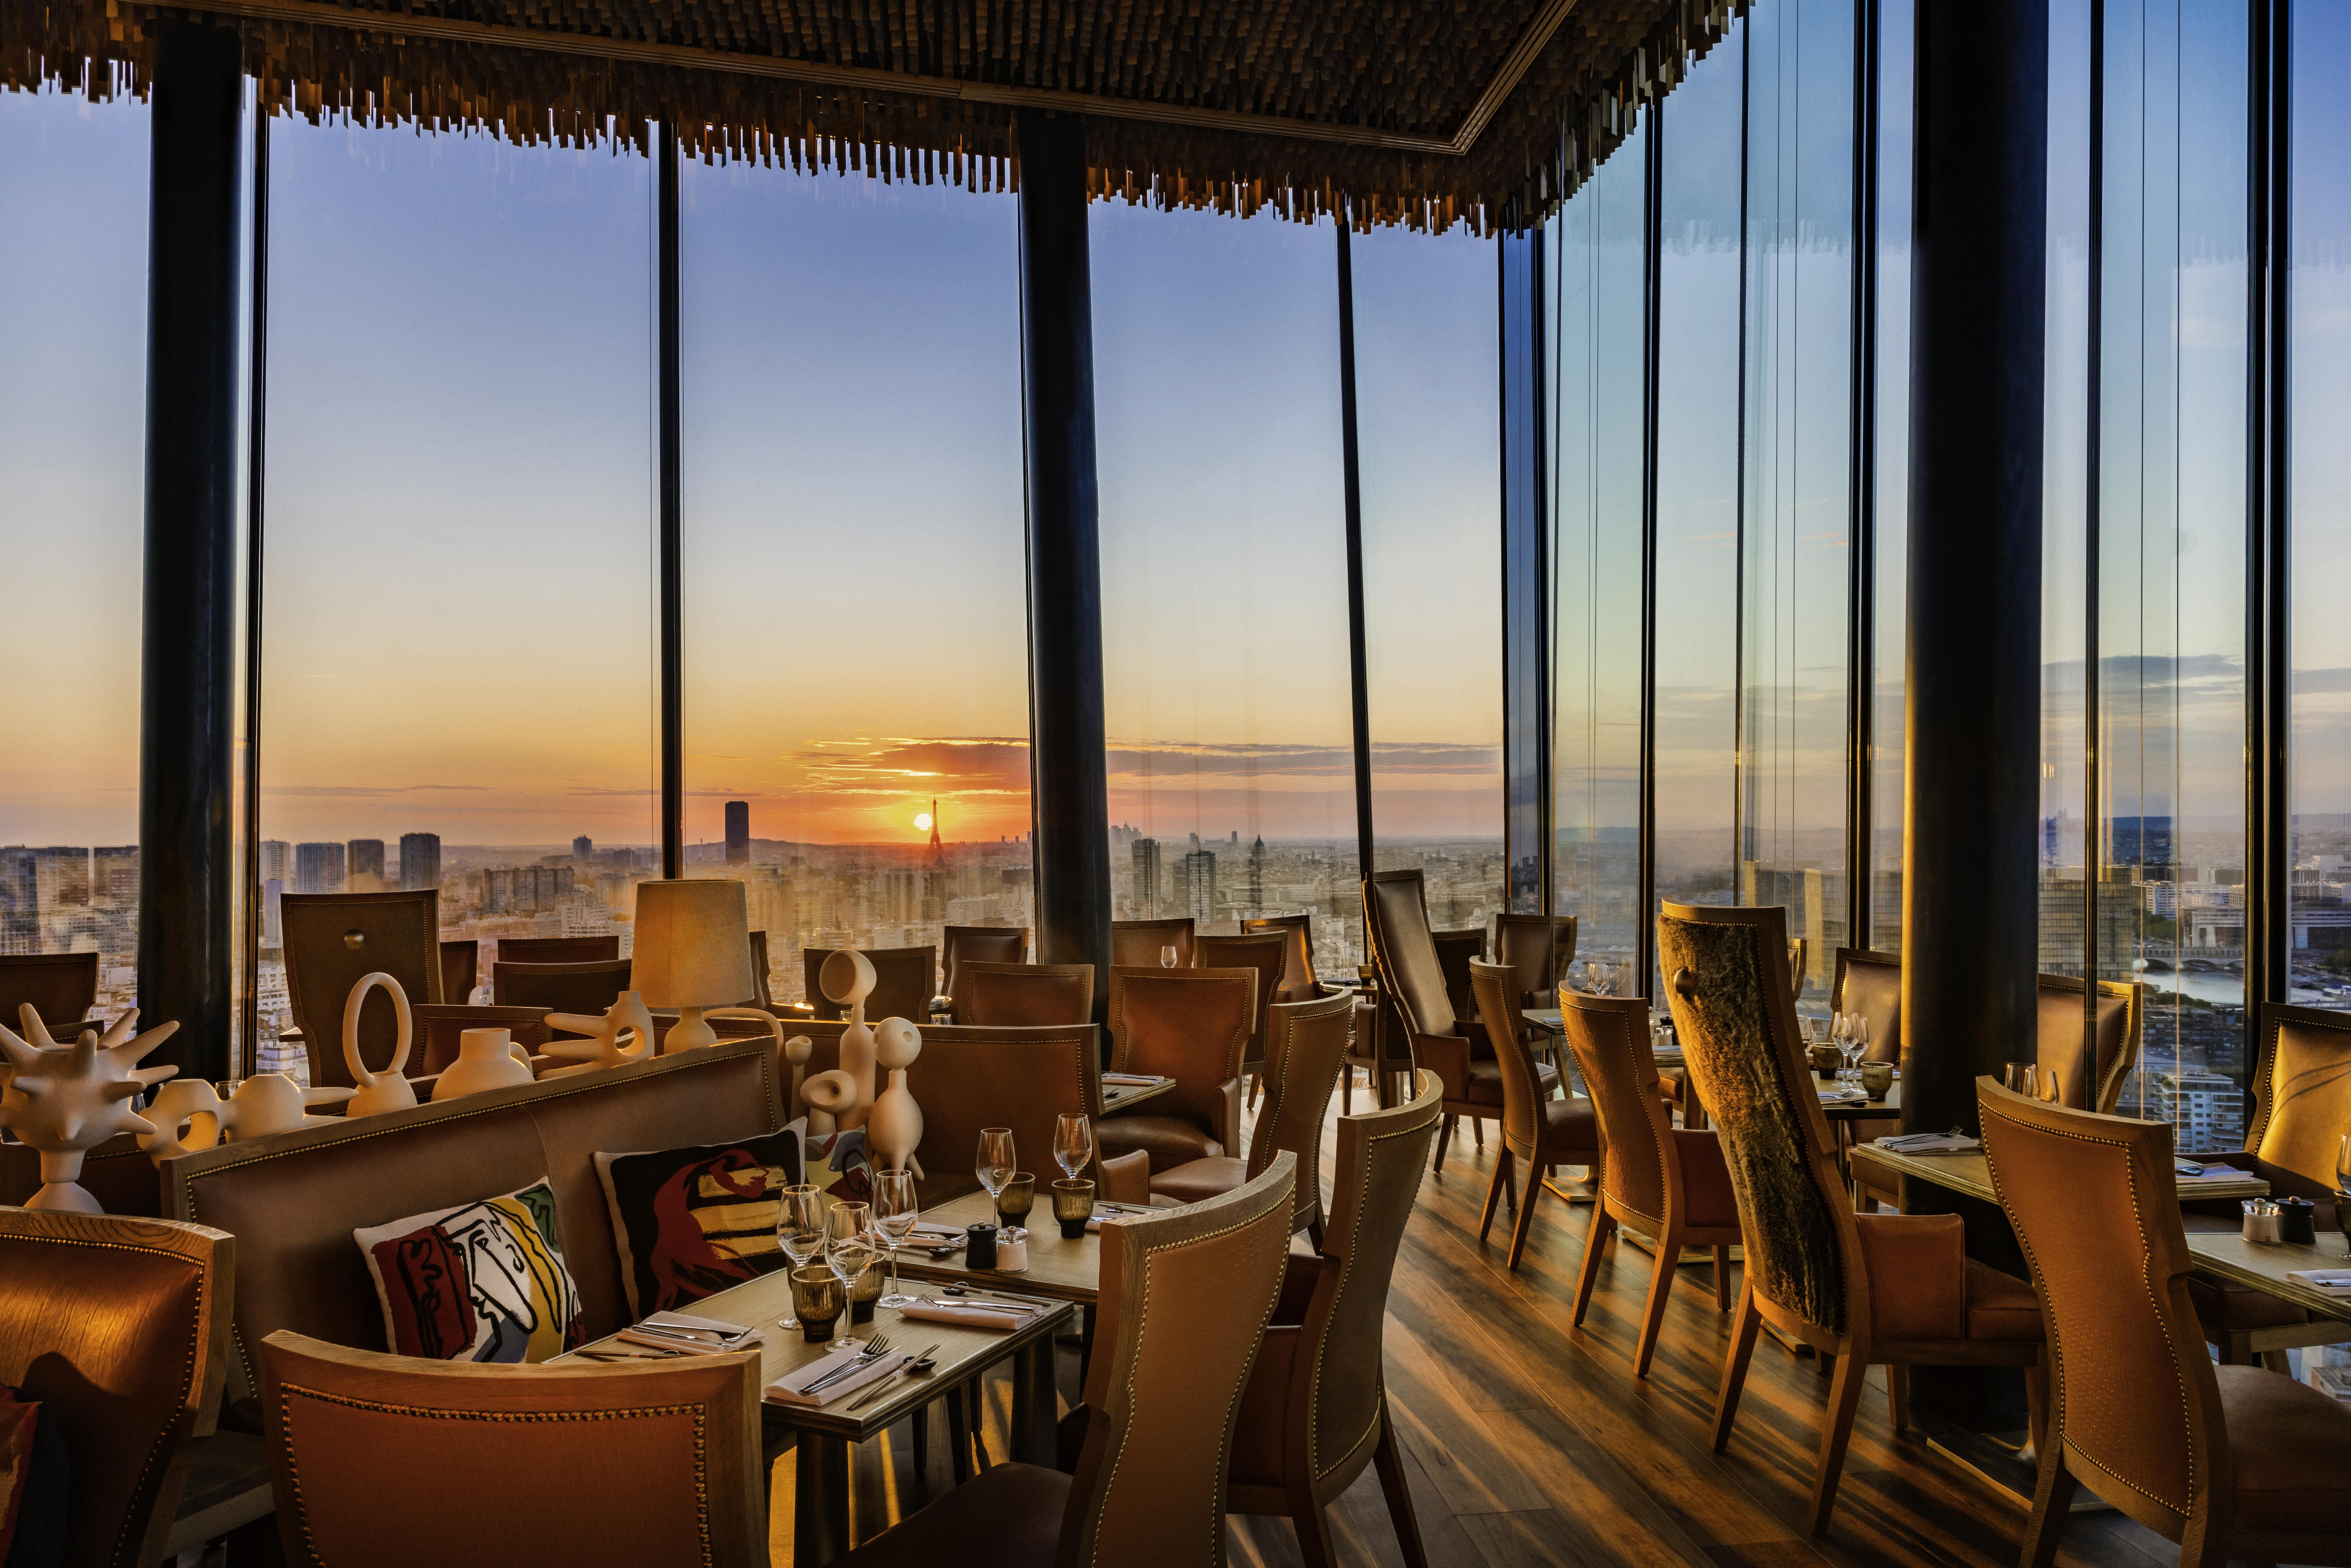 Luxury restaurant with a view on sunsetting